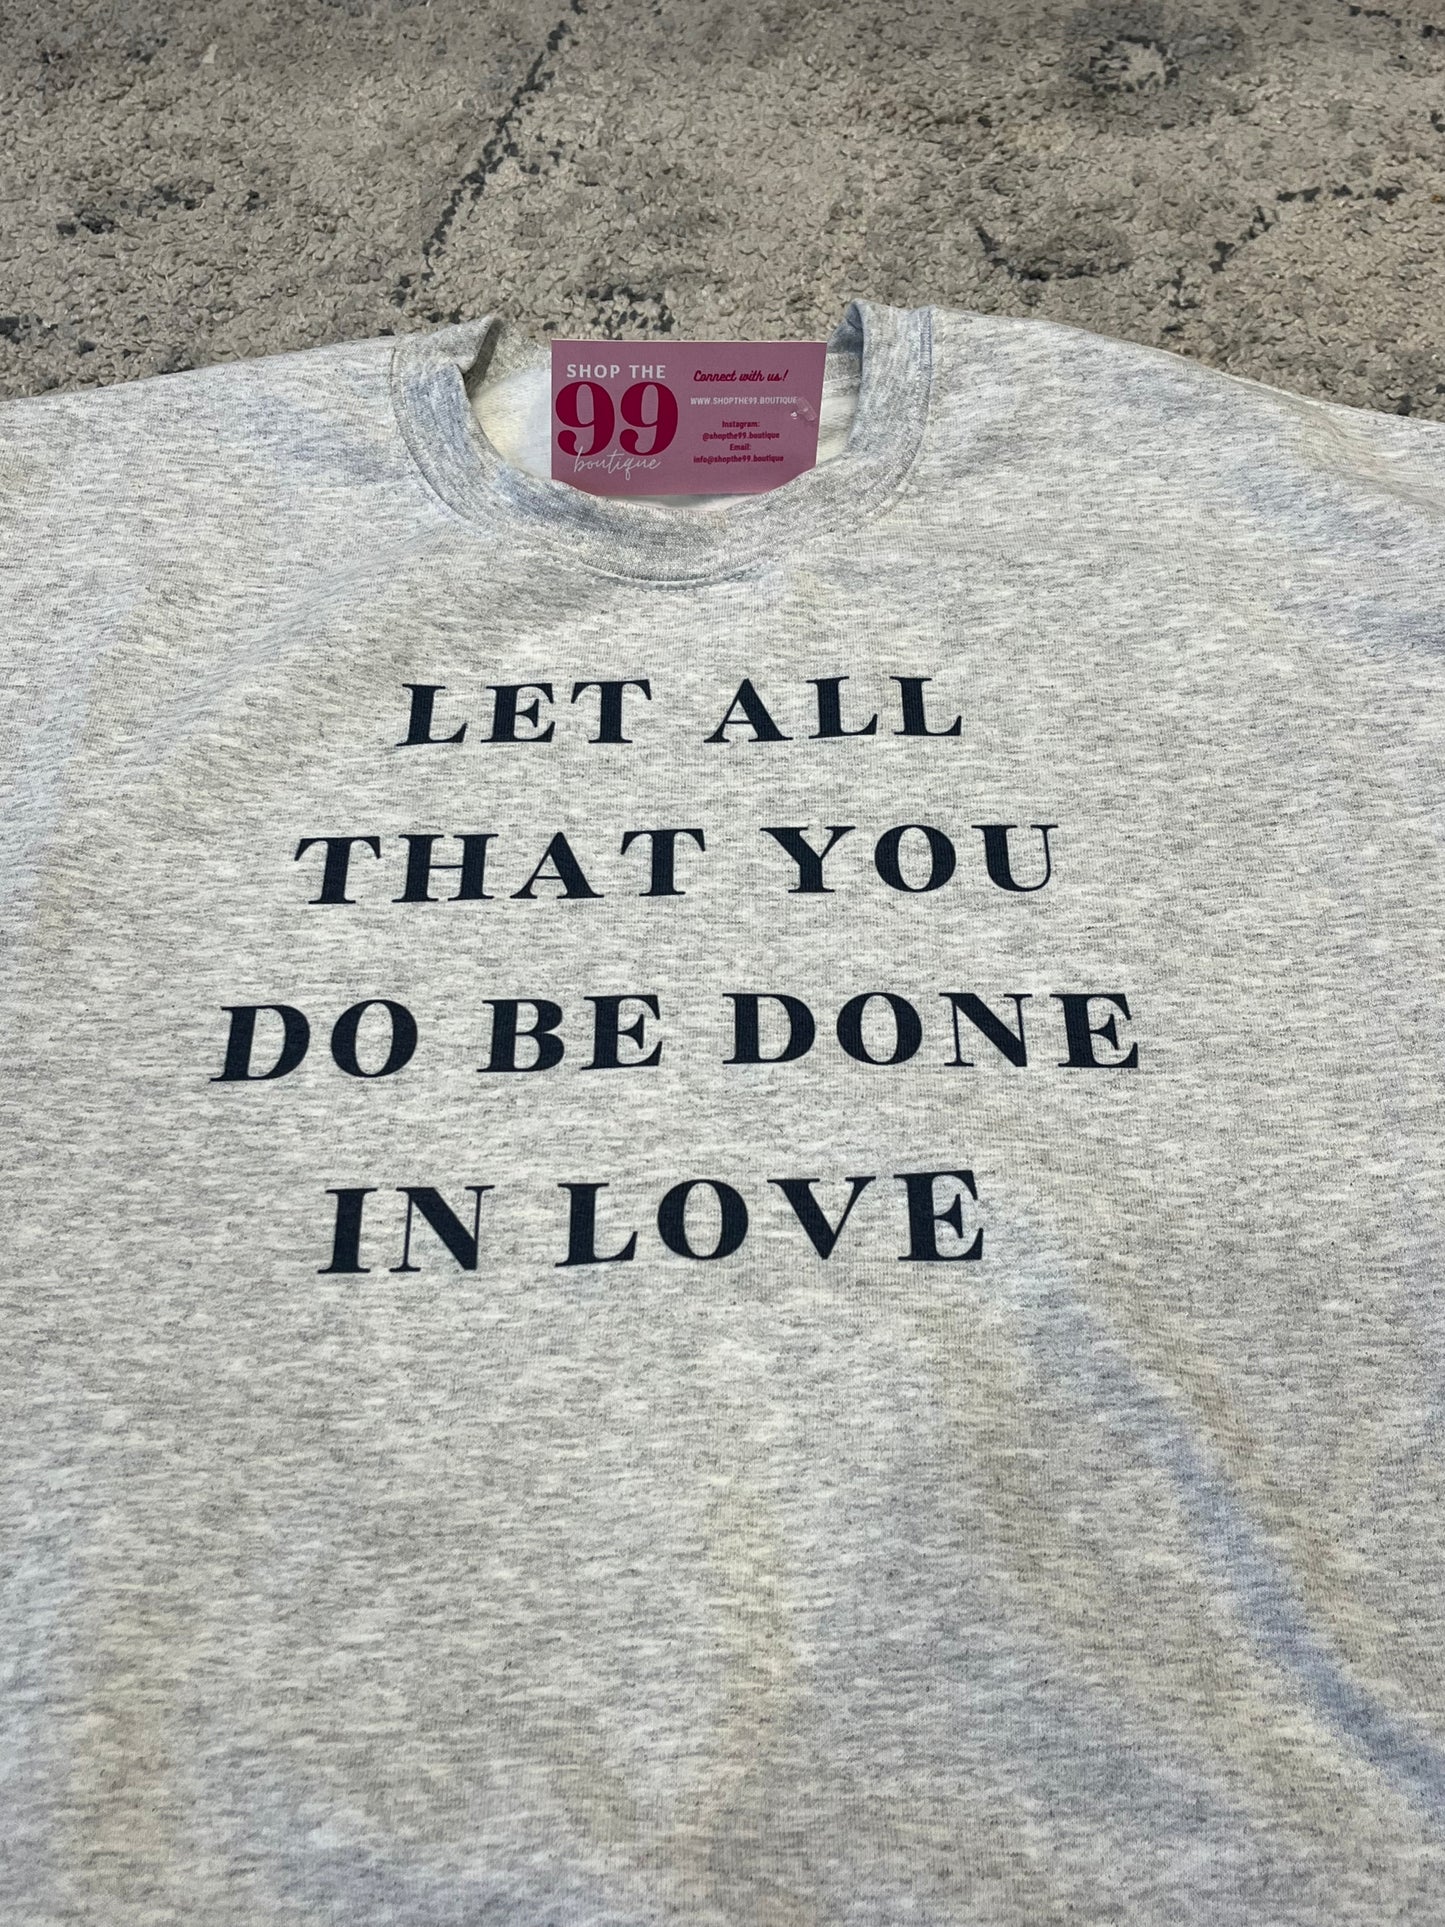 LET ALL YOU DO BE DONE IN LOVE